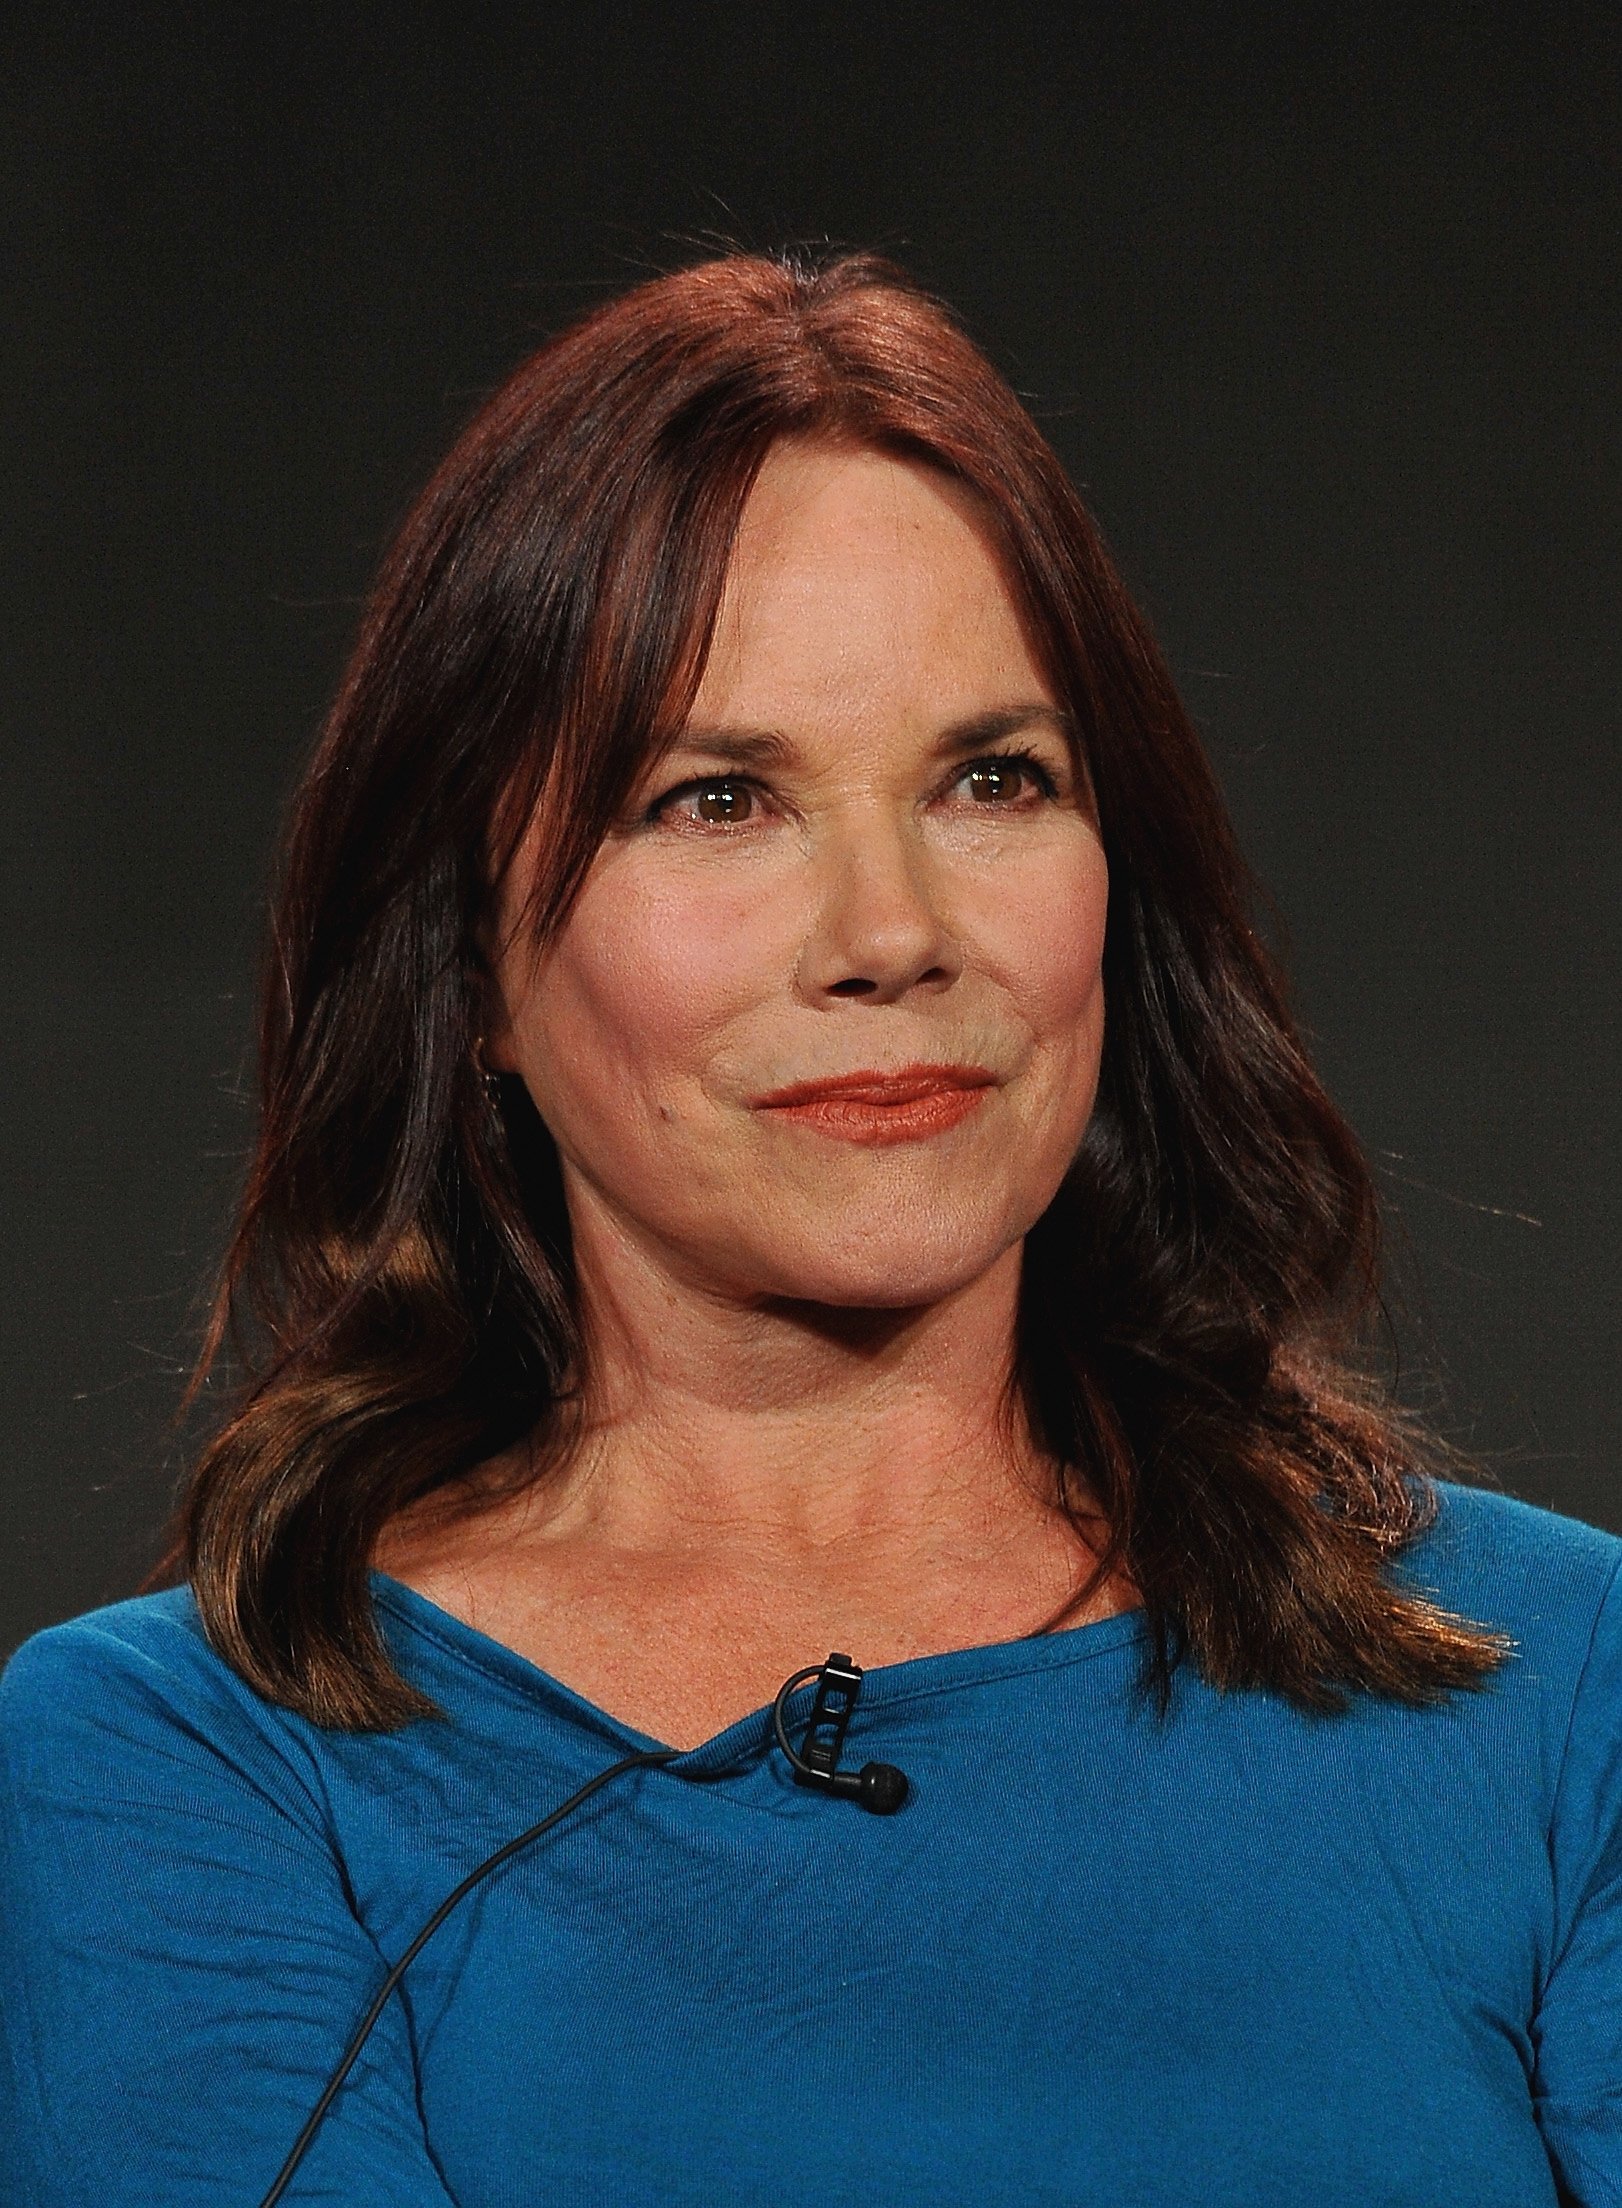 Barbara Hershey during the A+E Networks 2016 Television Critics Association Press Tour. | Source: Getty Images